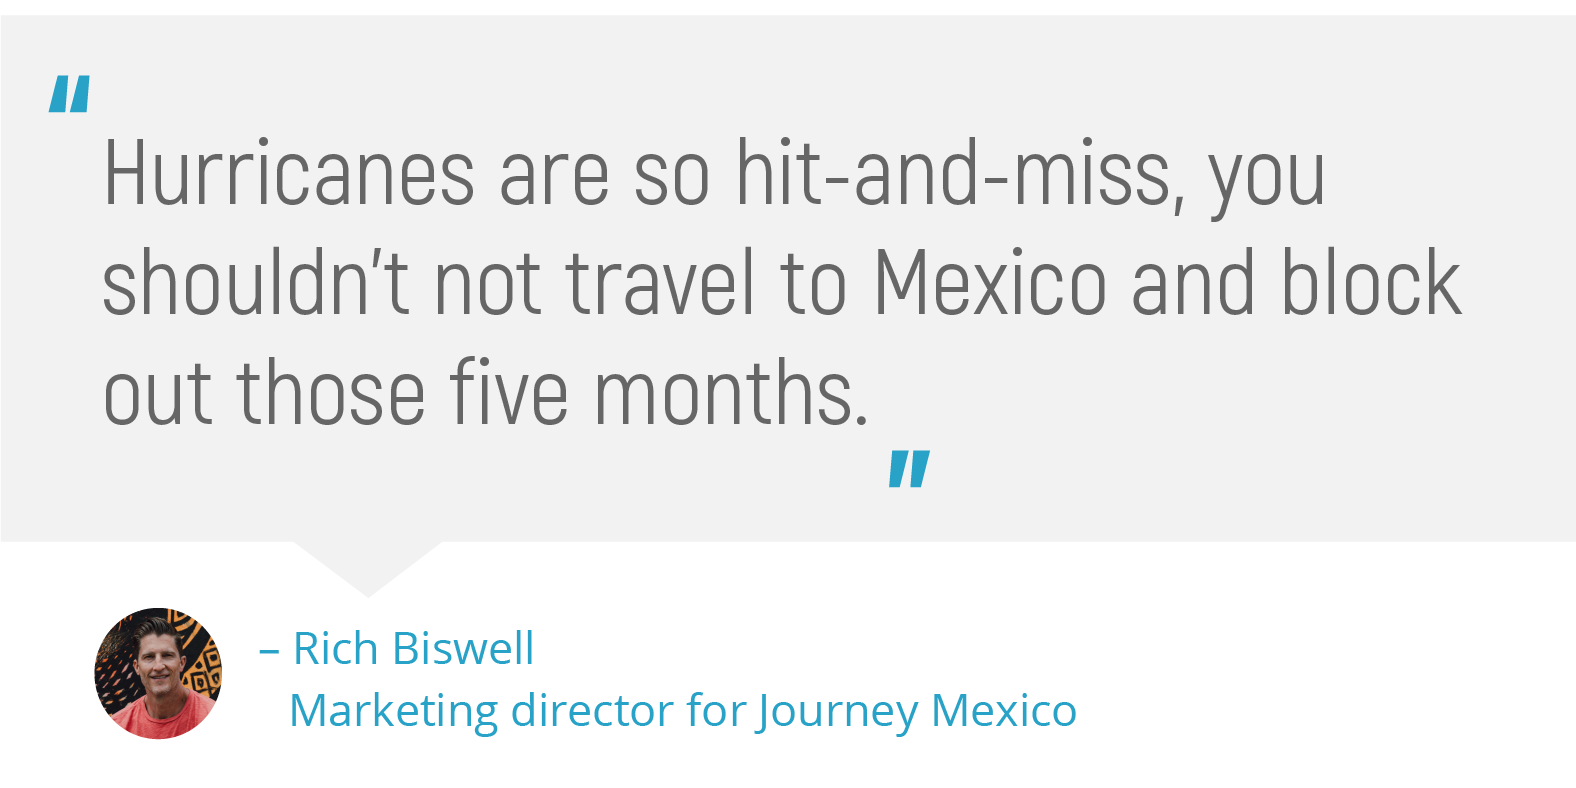 "Hurricanes are so hit-and-miss, you shouldn't not travel to mexico and block out those five months."